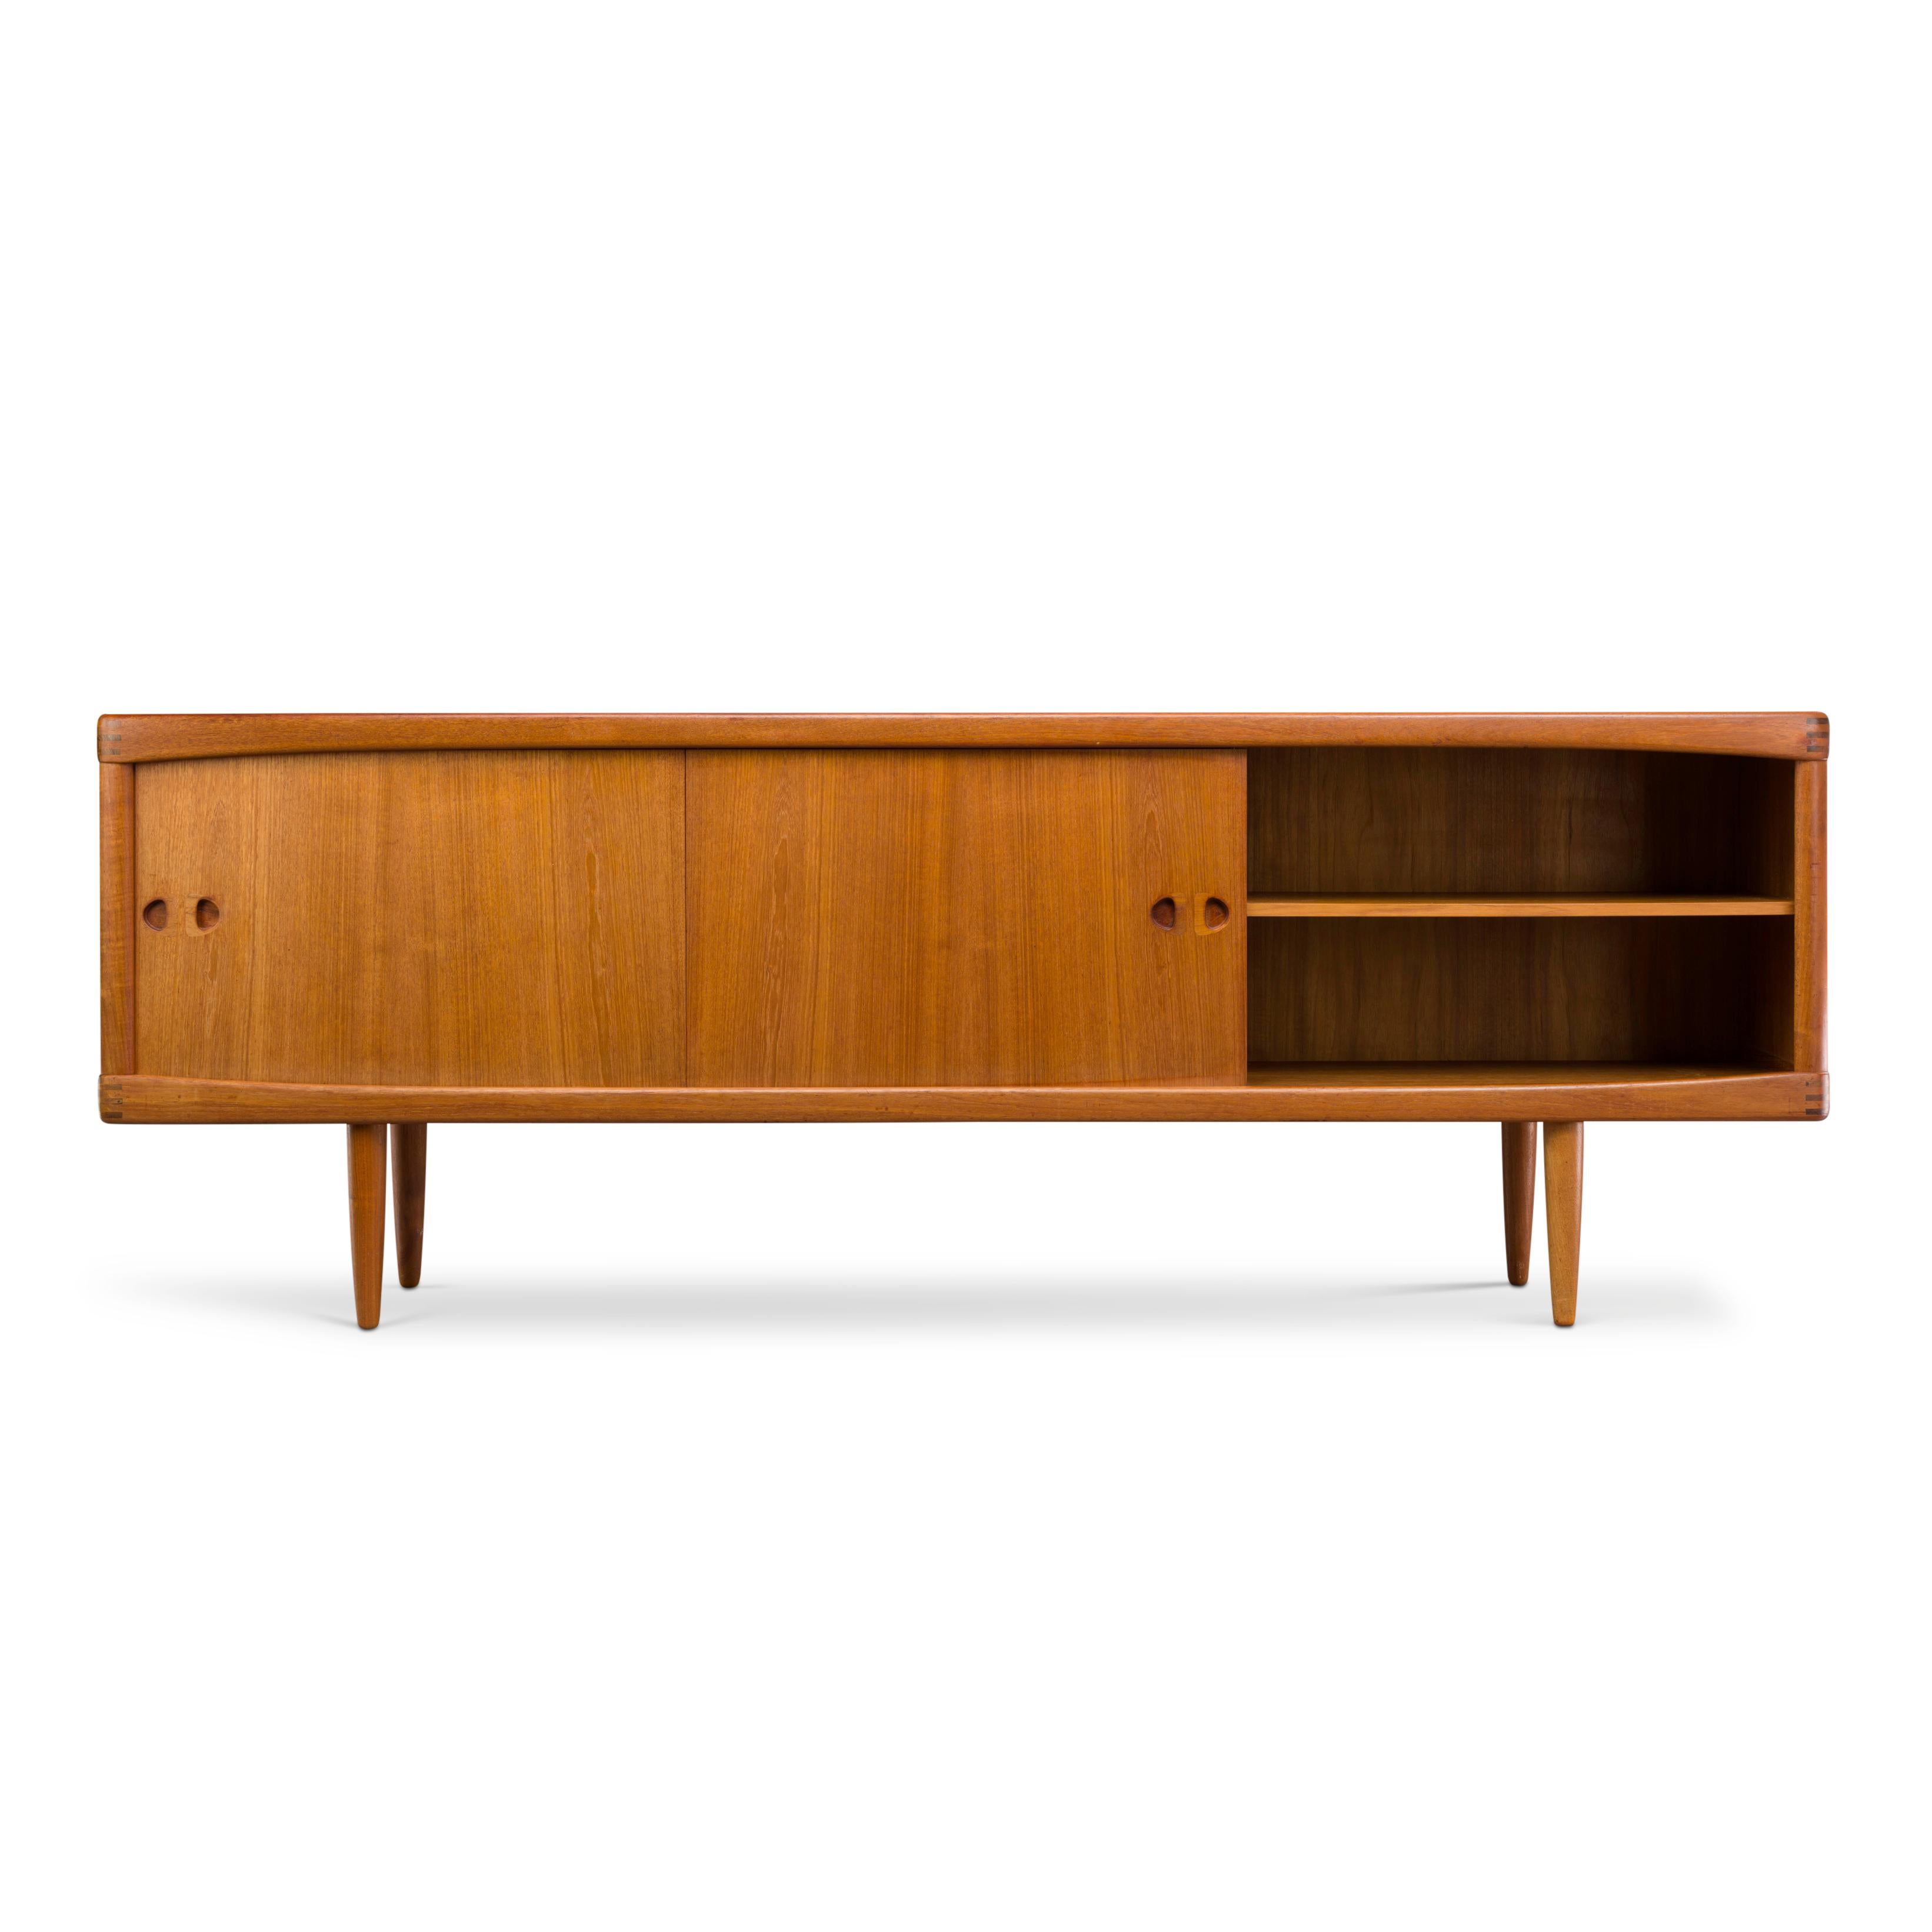 A true masterpiece! The essence of vintage design, that's what this credenza by H.W. Klein is. Klein was inspired by natural curvature and shapes and worked that into this piece of furniture with the highest possible quality of furniture making.